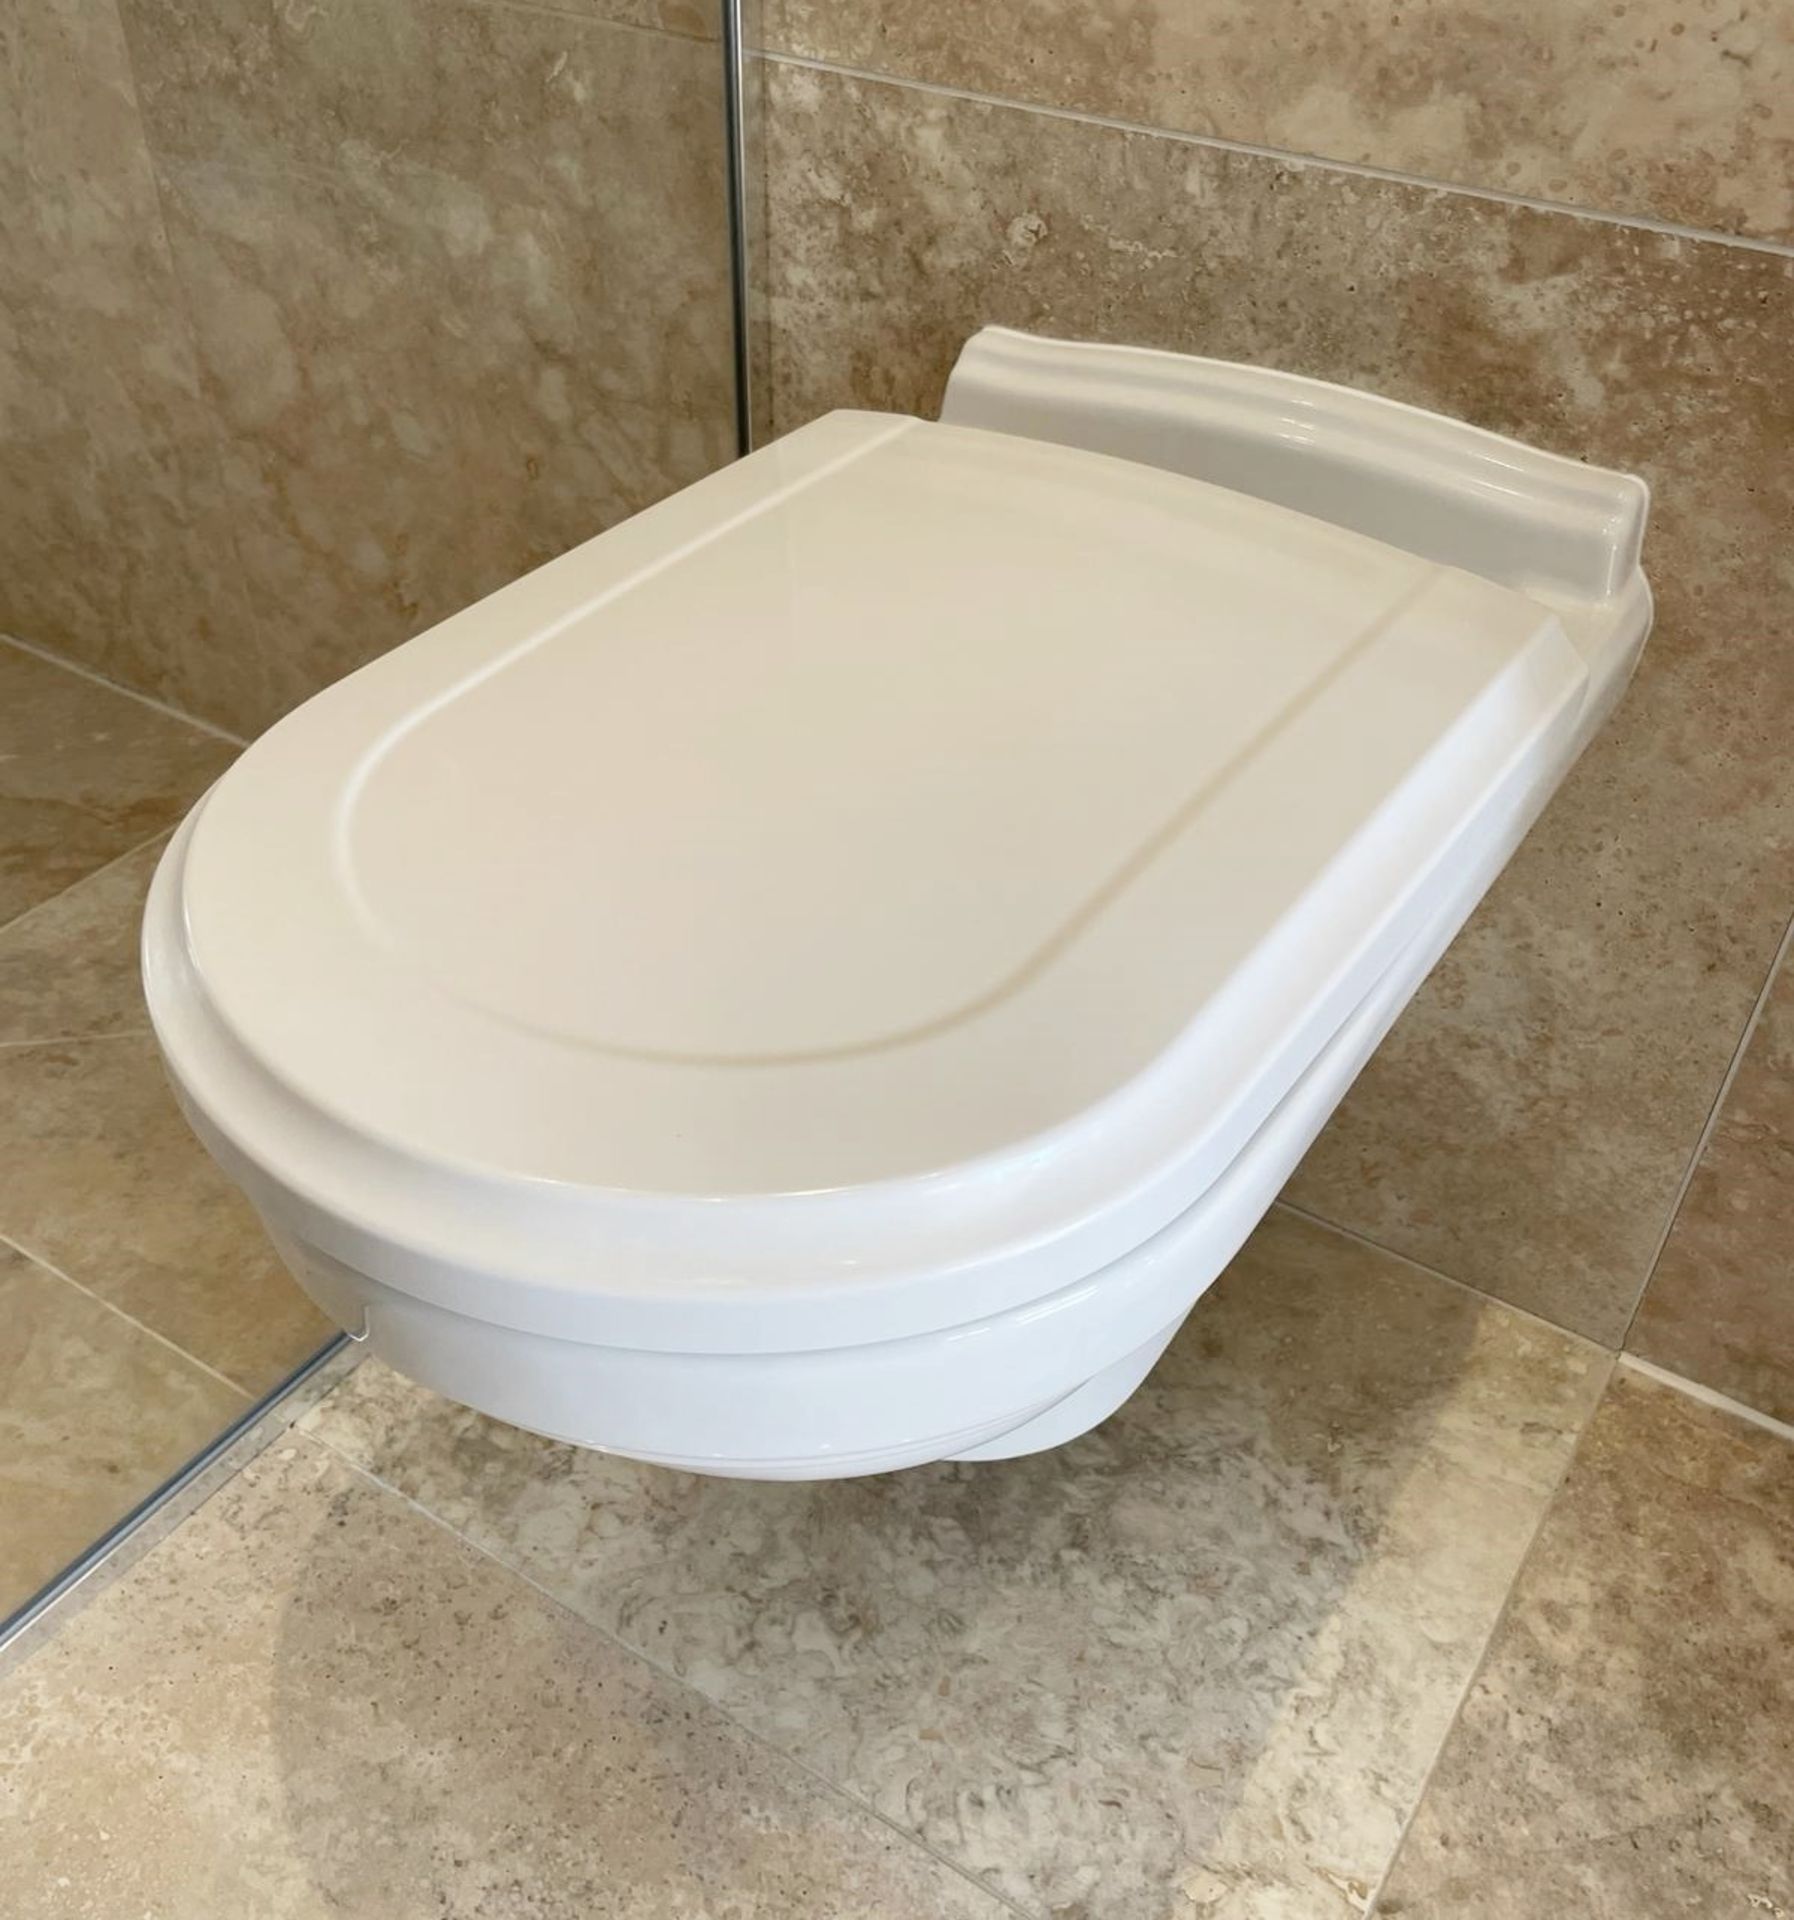 1 x VILLEROY & BOCH Wall Hung Toilet with Geberit Flush Plate - Ref: PAN273 BED3bth - CL896 - NO VAT - Image 5 of 9